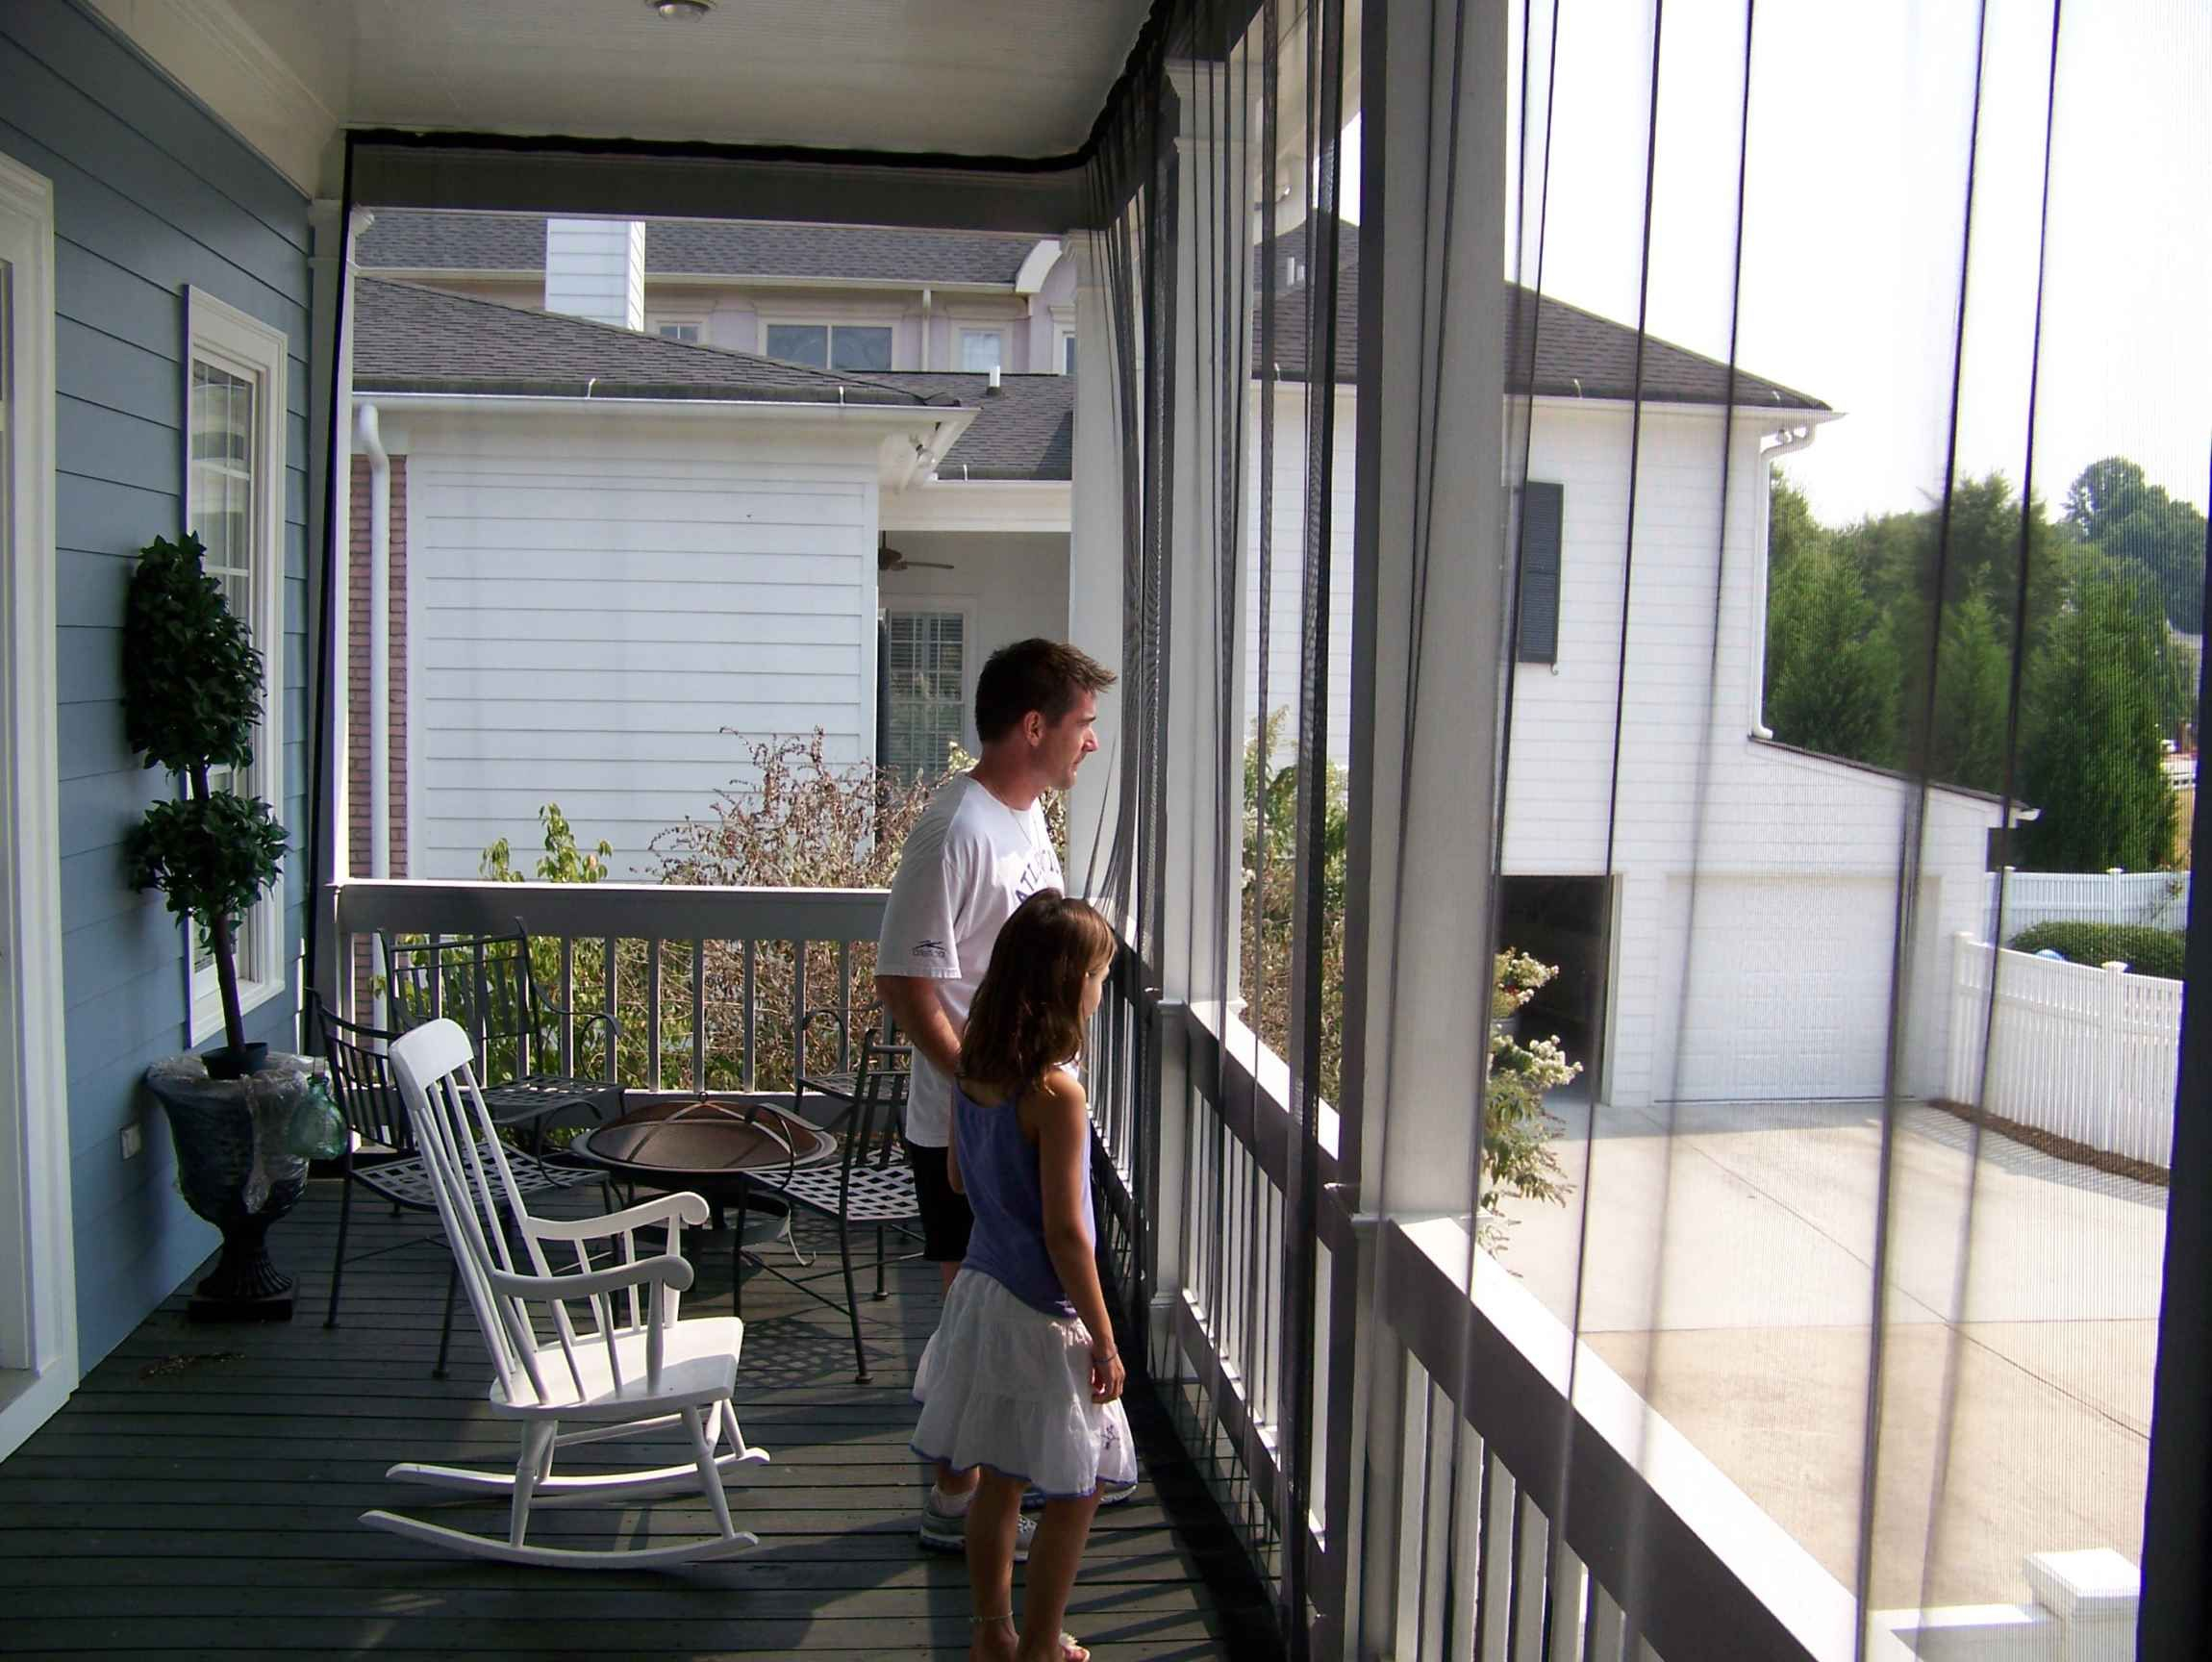 Mosquito Netting Mesh Curtains For The Balcony Want For The with proportions 2300 X 1728